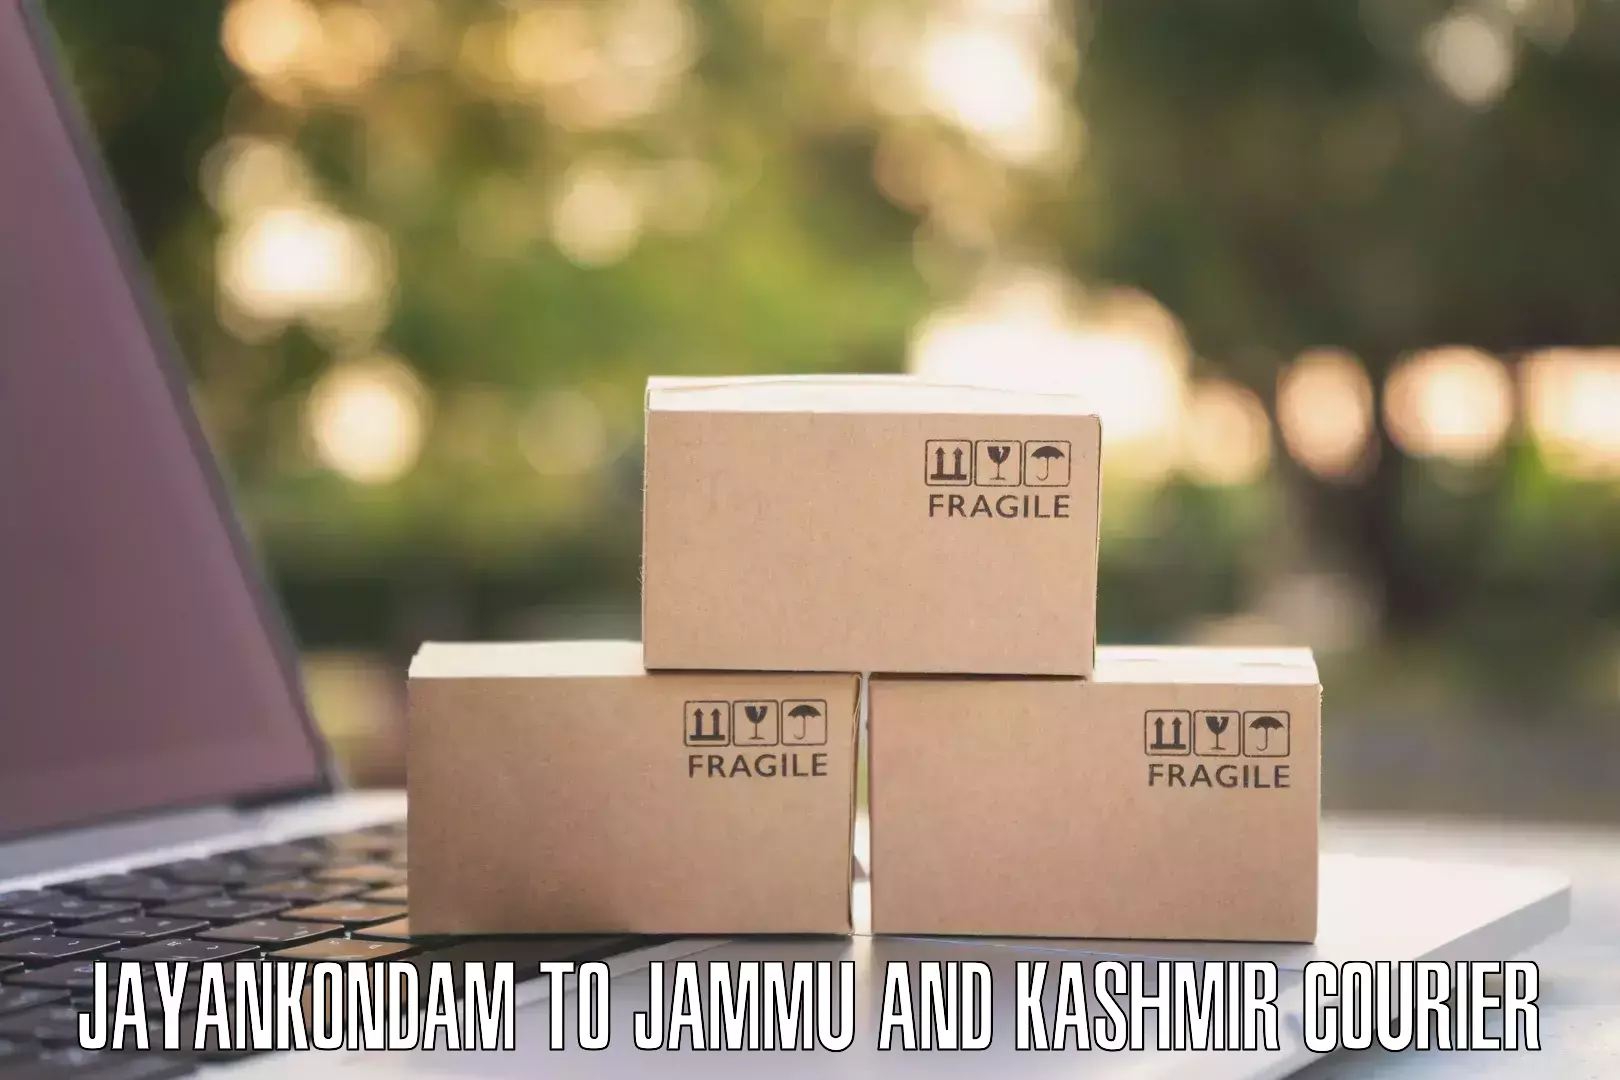 Local courier options Jayankondam to Udhampur